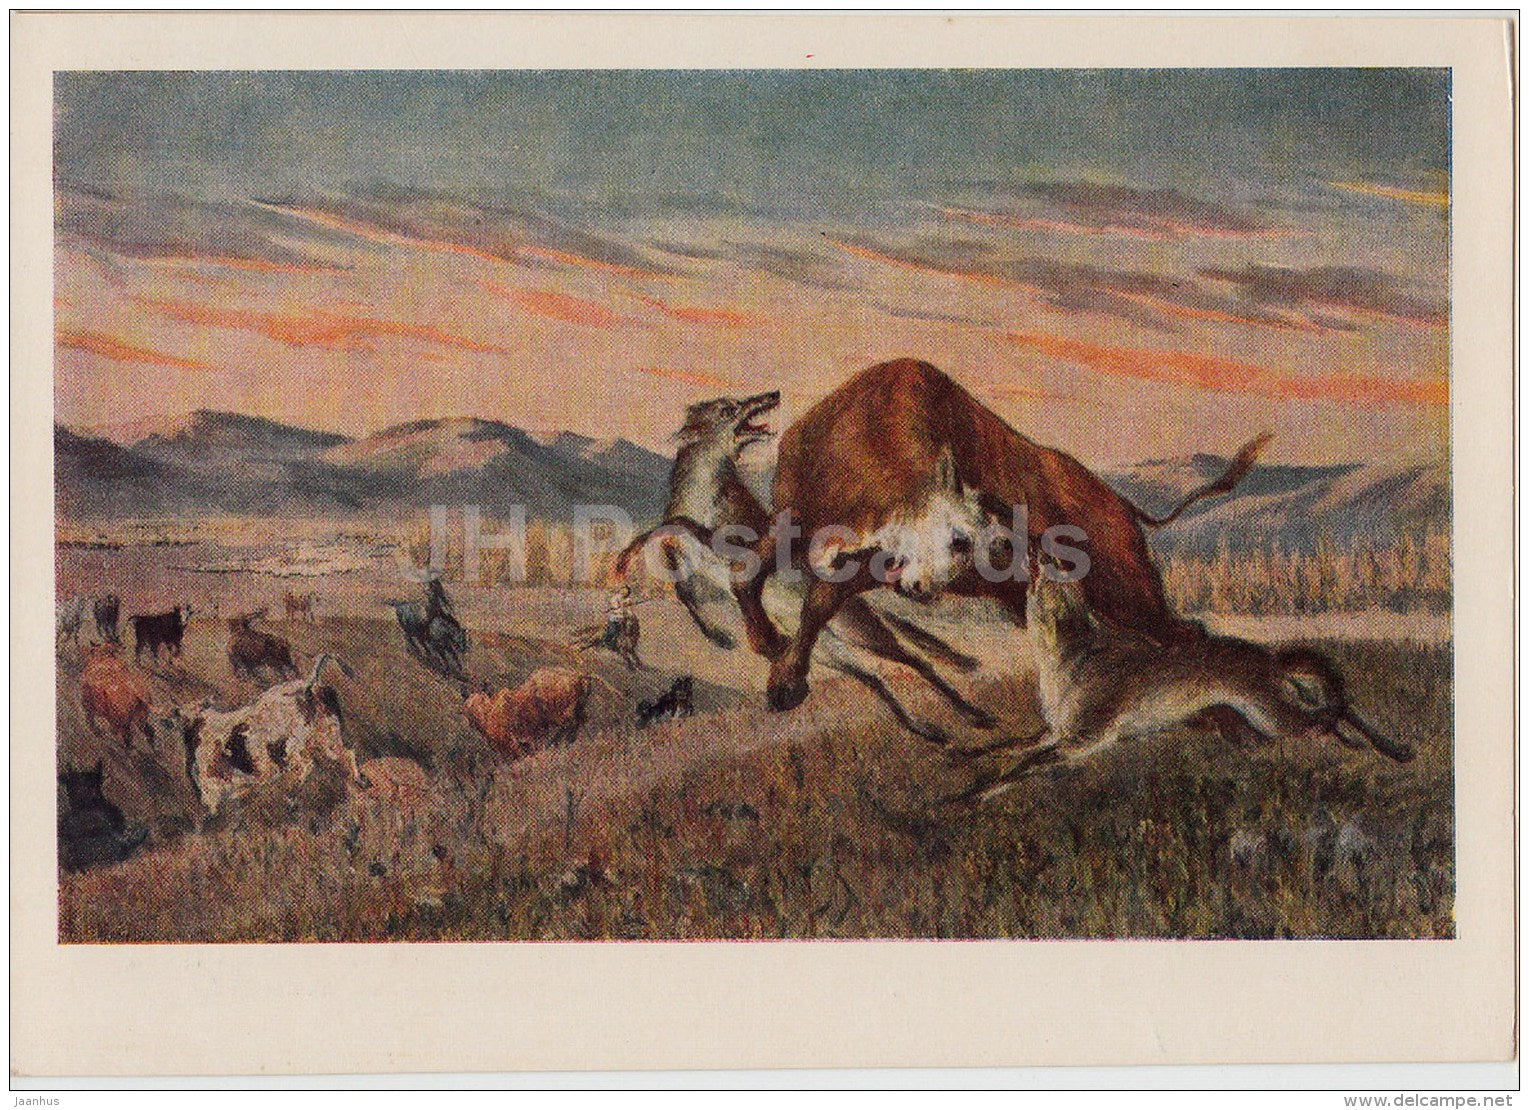 Painting by Tsybikzhap - Wolves attack - herd - Mongolian art - 1954 - Russia USSR - unused - JH Postcards